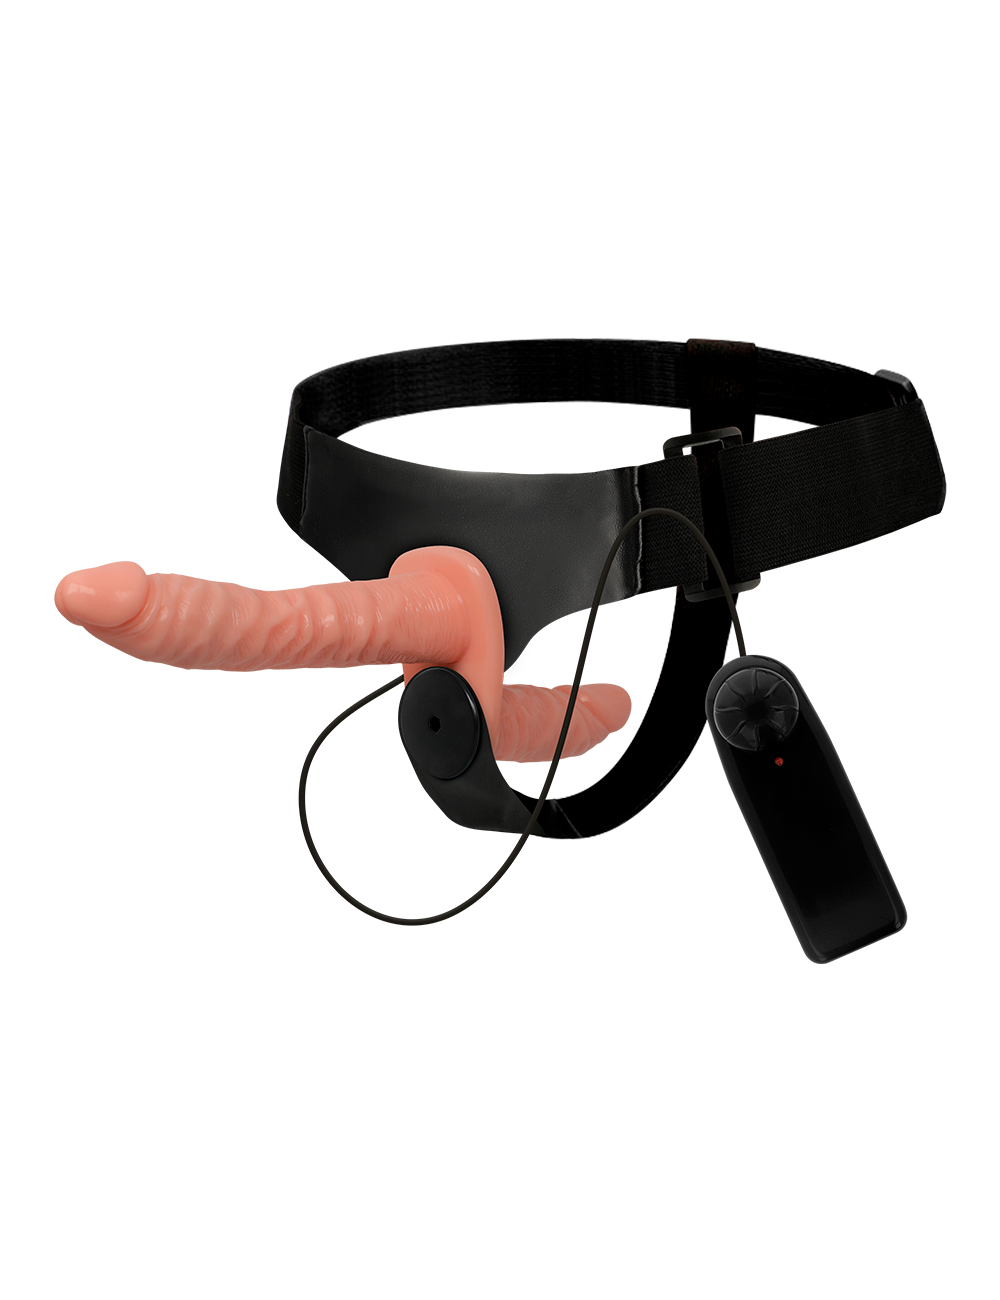 HARNESS ATTRACTION HARRIS VIBRATING DOUBLE HARNESS 18 X 3.5CM